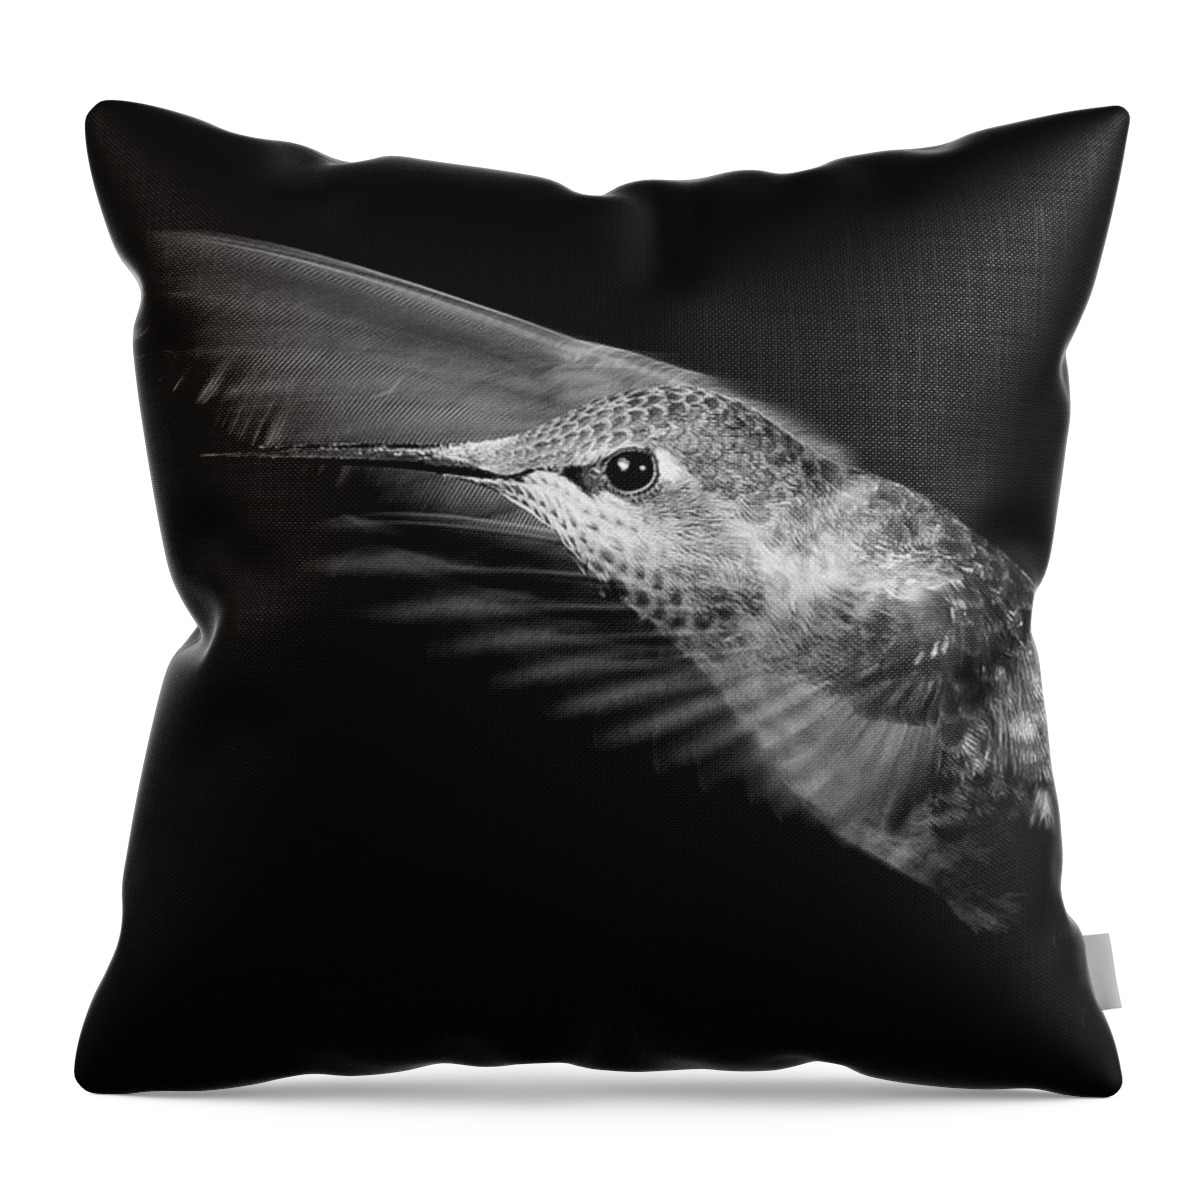 Animal Throw Pillow featuring the photograph Silver Splendor by Briand Sanderson